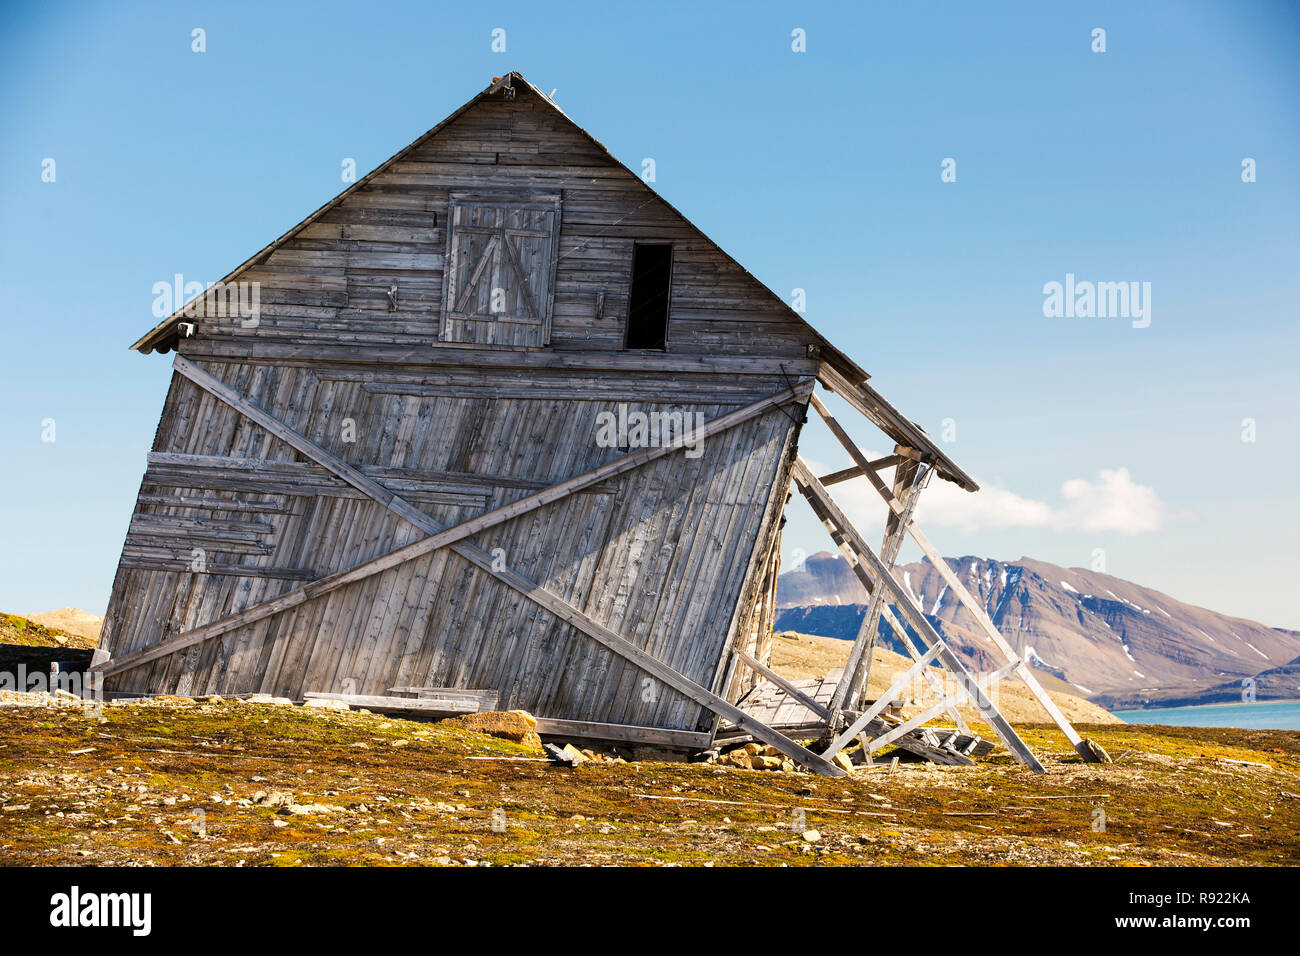 An old house at Recherchefjorden (77Ãáẁ31ÃḃÂn 14Ãáẁ36ÃḃÂe), Van Keulenfjorden, Spitsbergen, Svalbard. It is gradually sliding down slope due to solifluction and permafrost melt. Climate change is accelerating permafrost melt and causing huge damage across the Arctic. It is also one of the feedback loops that exascerbate climate change, as the permafrost locks away billions of tonnes of methane (a greenhouse gas 23 times more potent than C02), as the permafrost melts this methane is released into the atmosphere with porentially disastrous consequences. Stock Photo